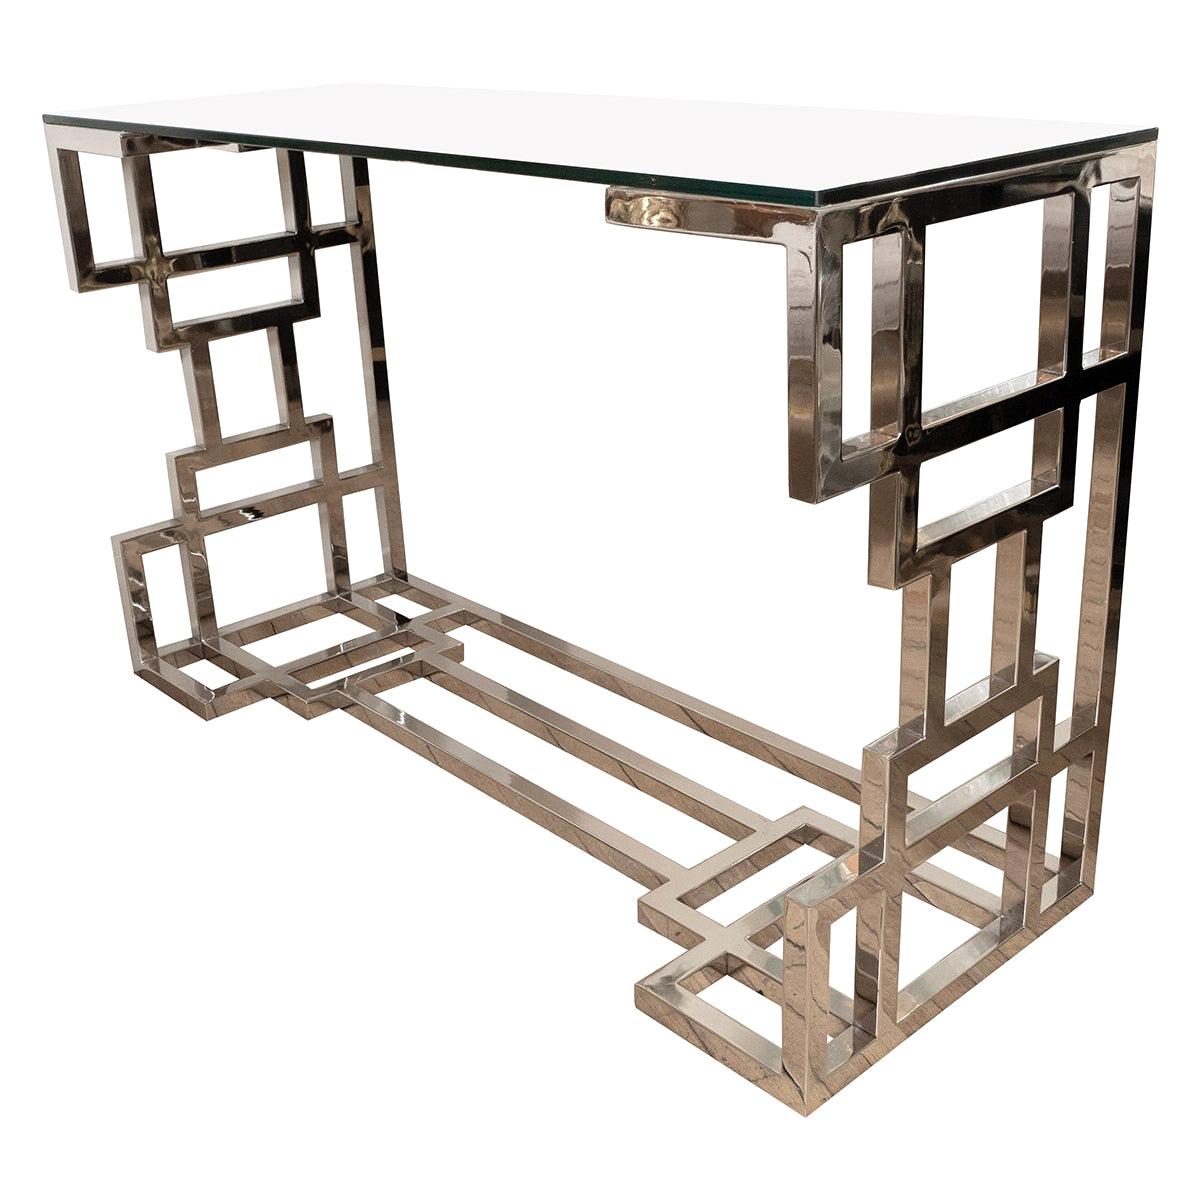 Polished Nickel Geometric Design Console Table